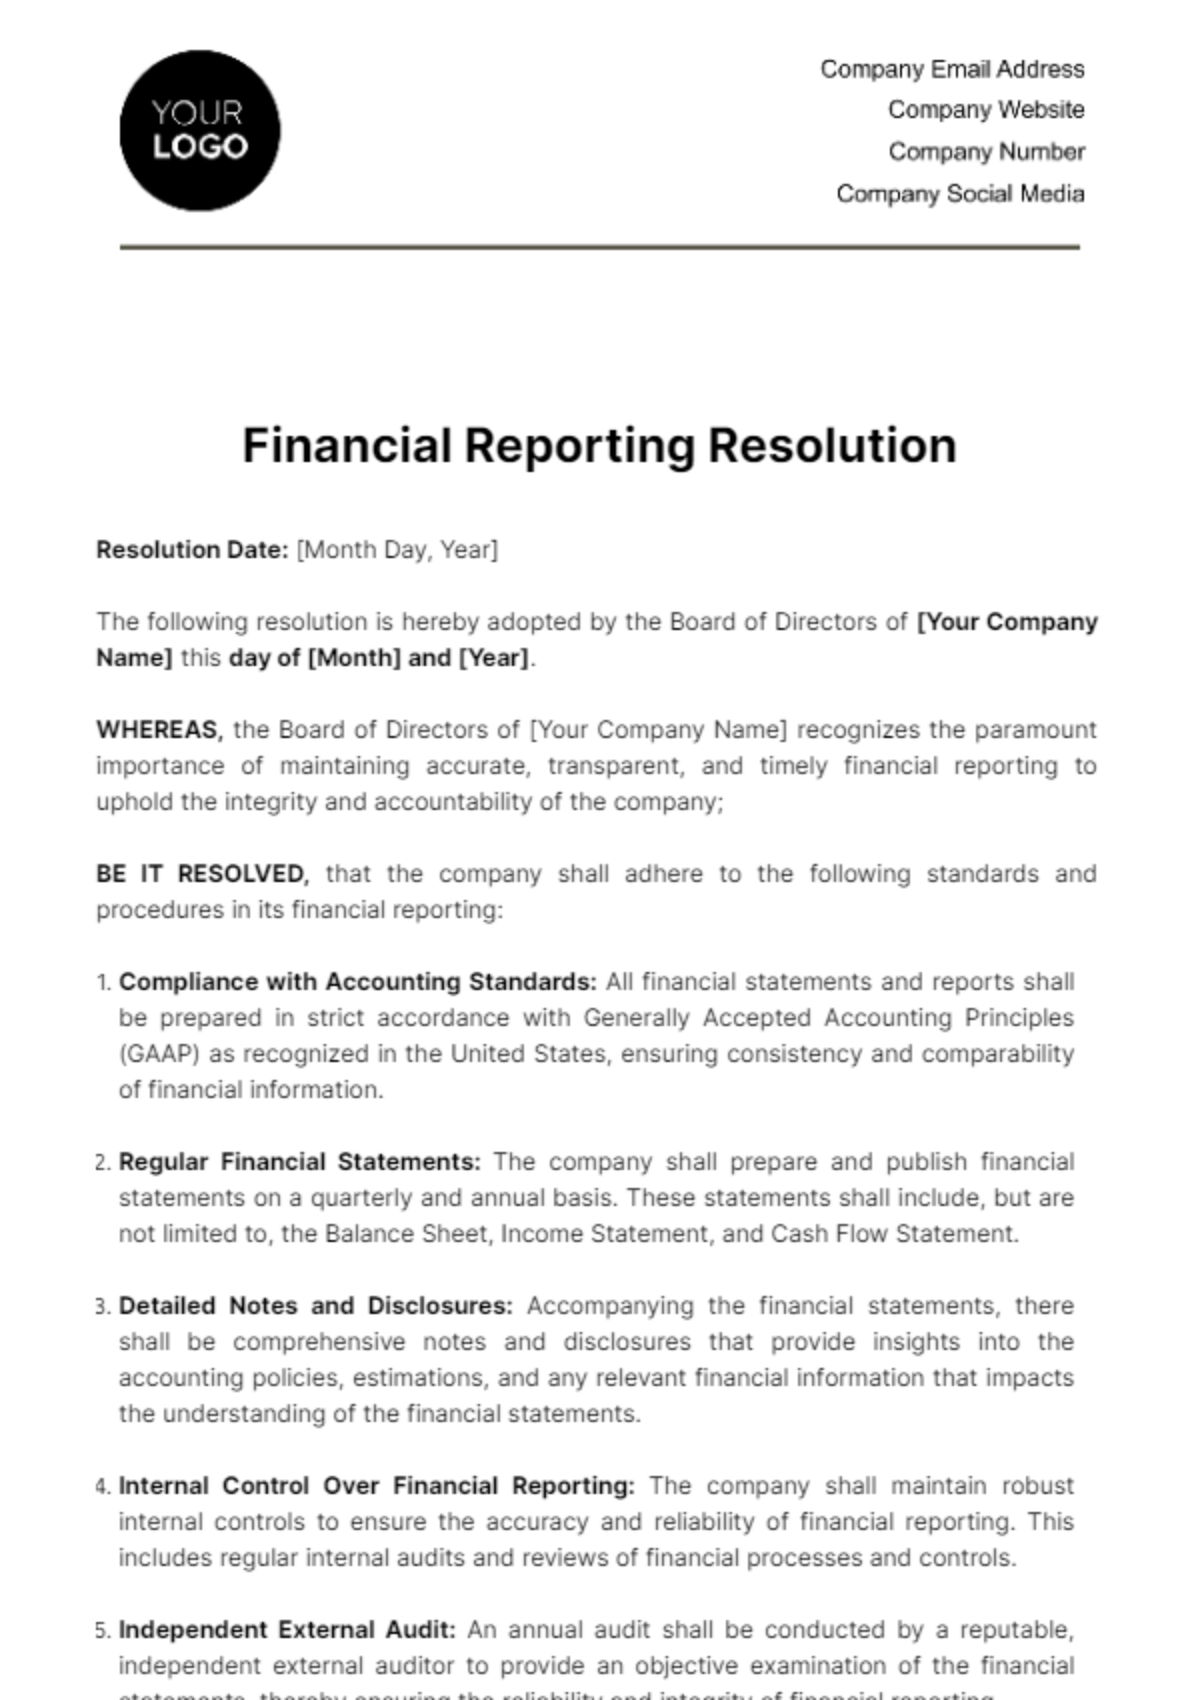 Financial Reporting Resolution Template